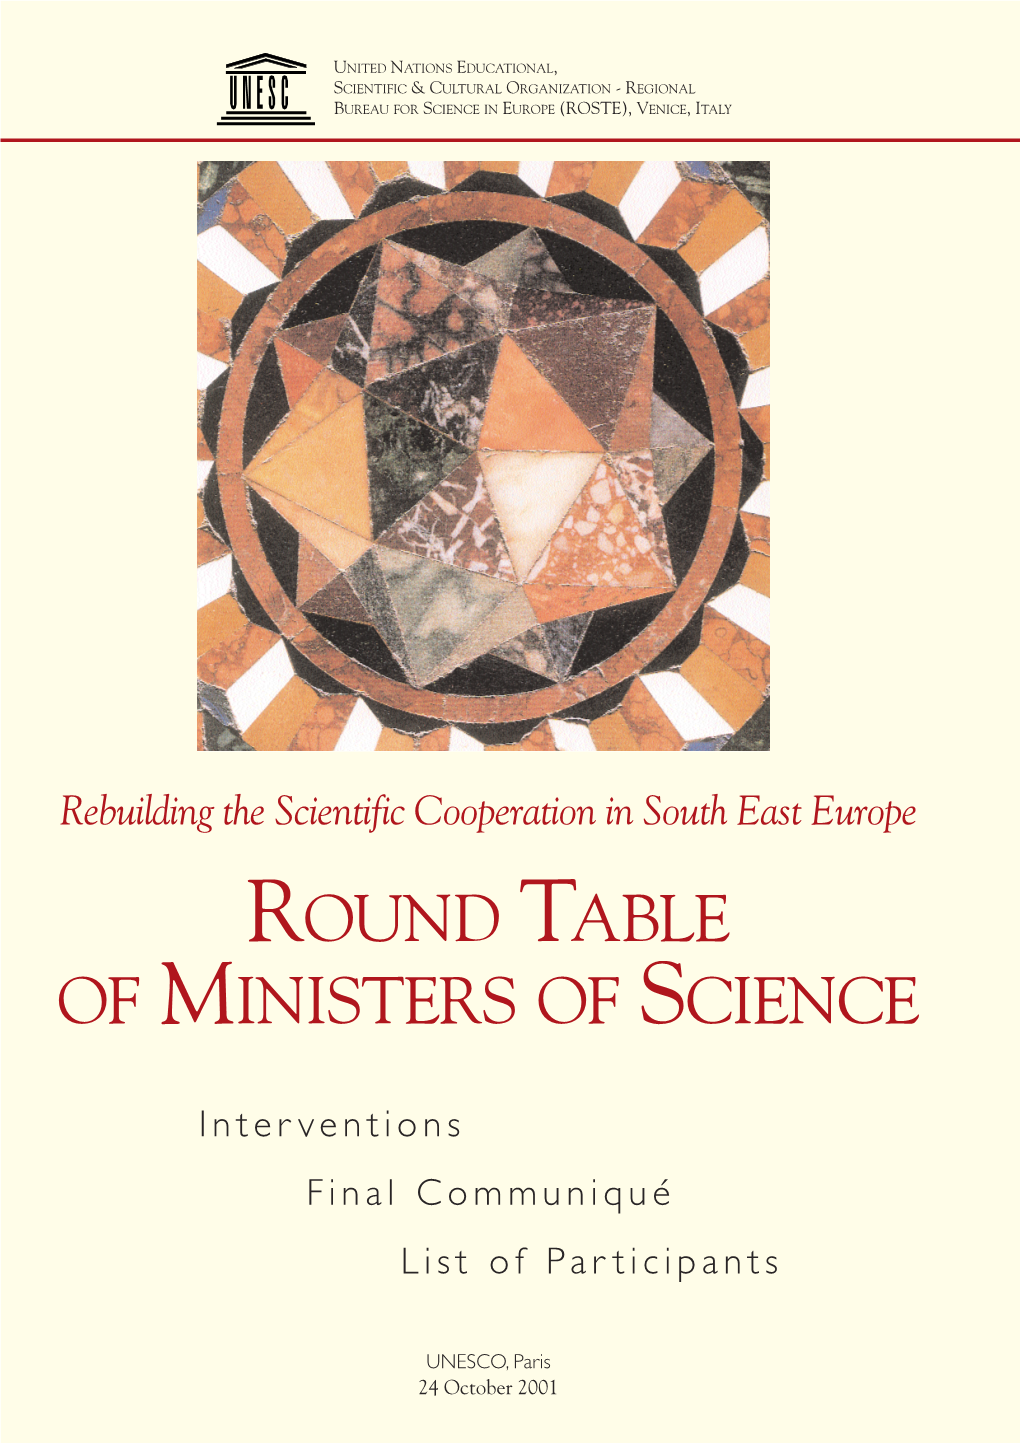 Round Table of Ministers of Science